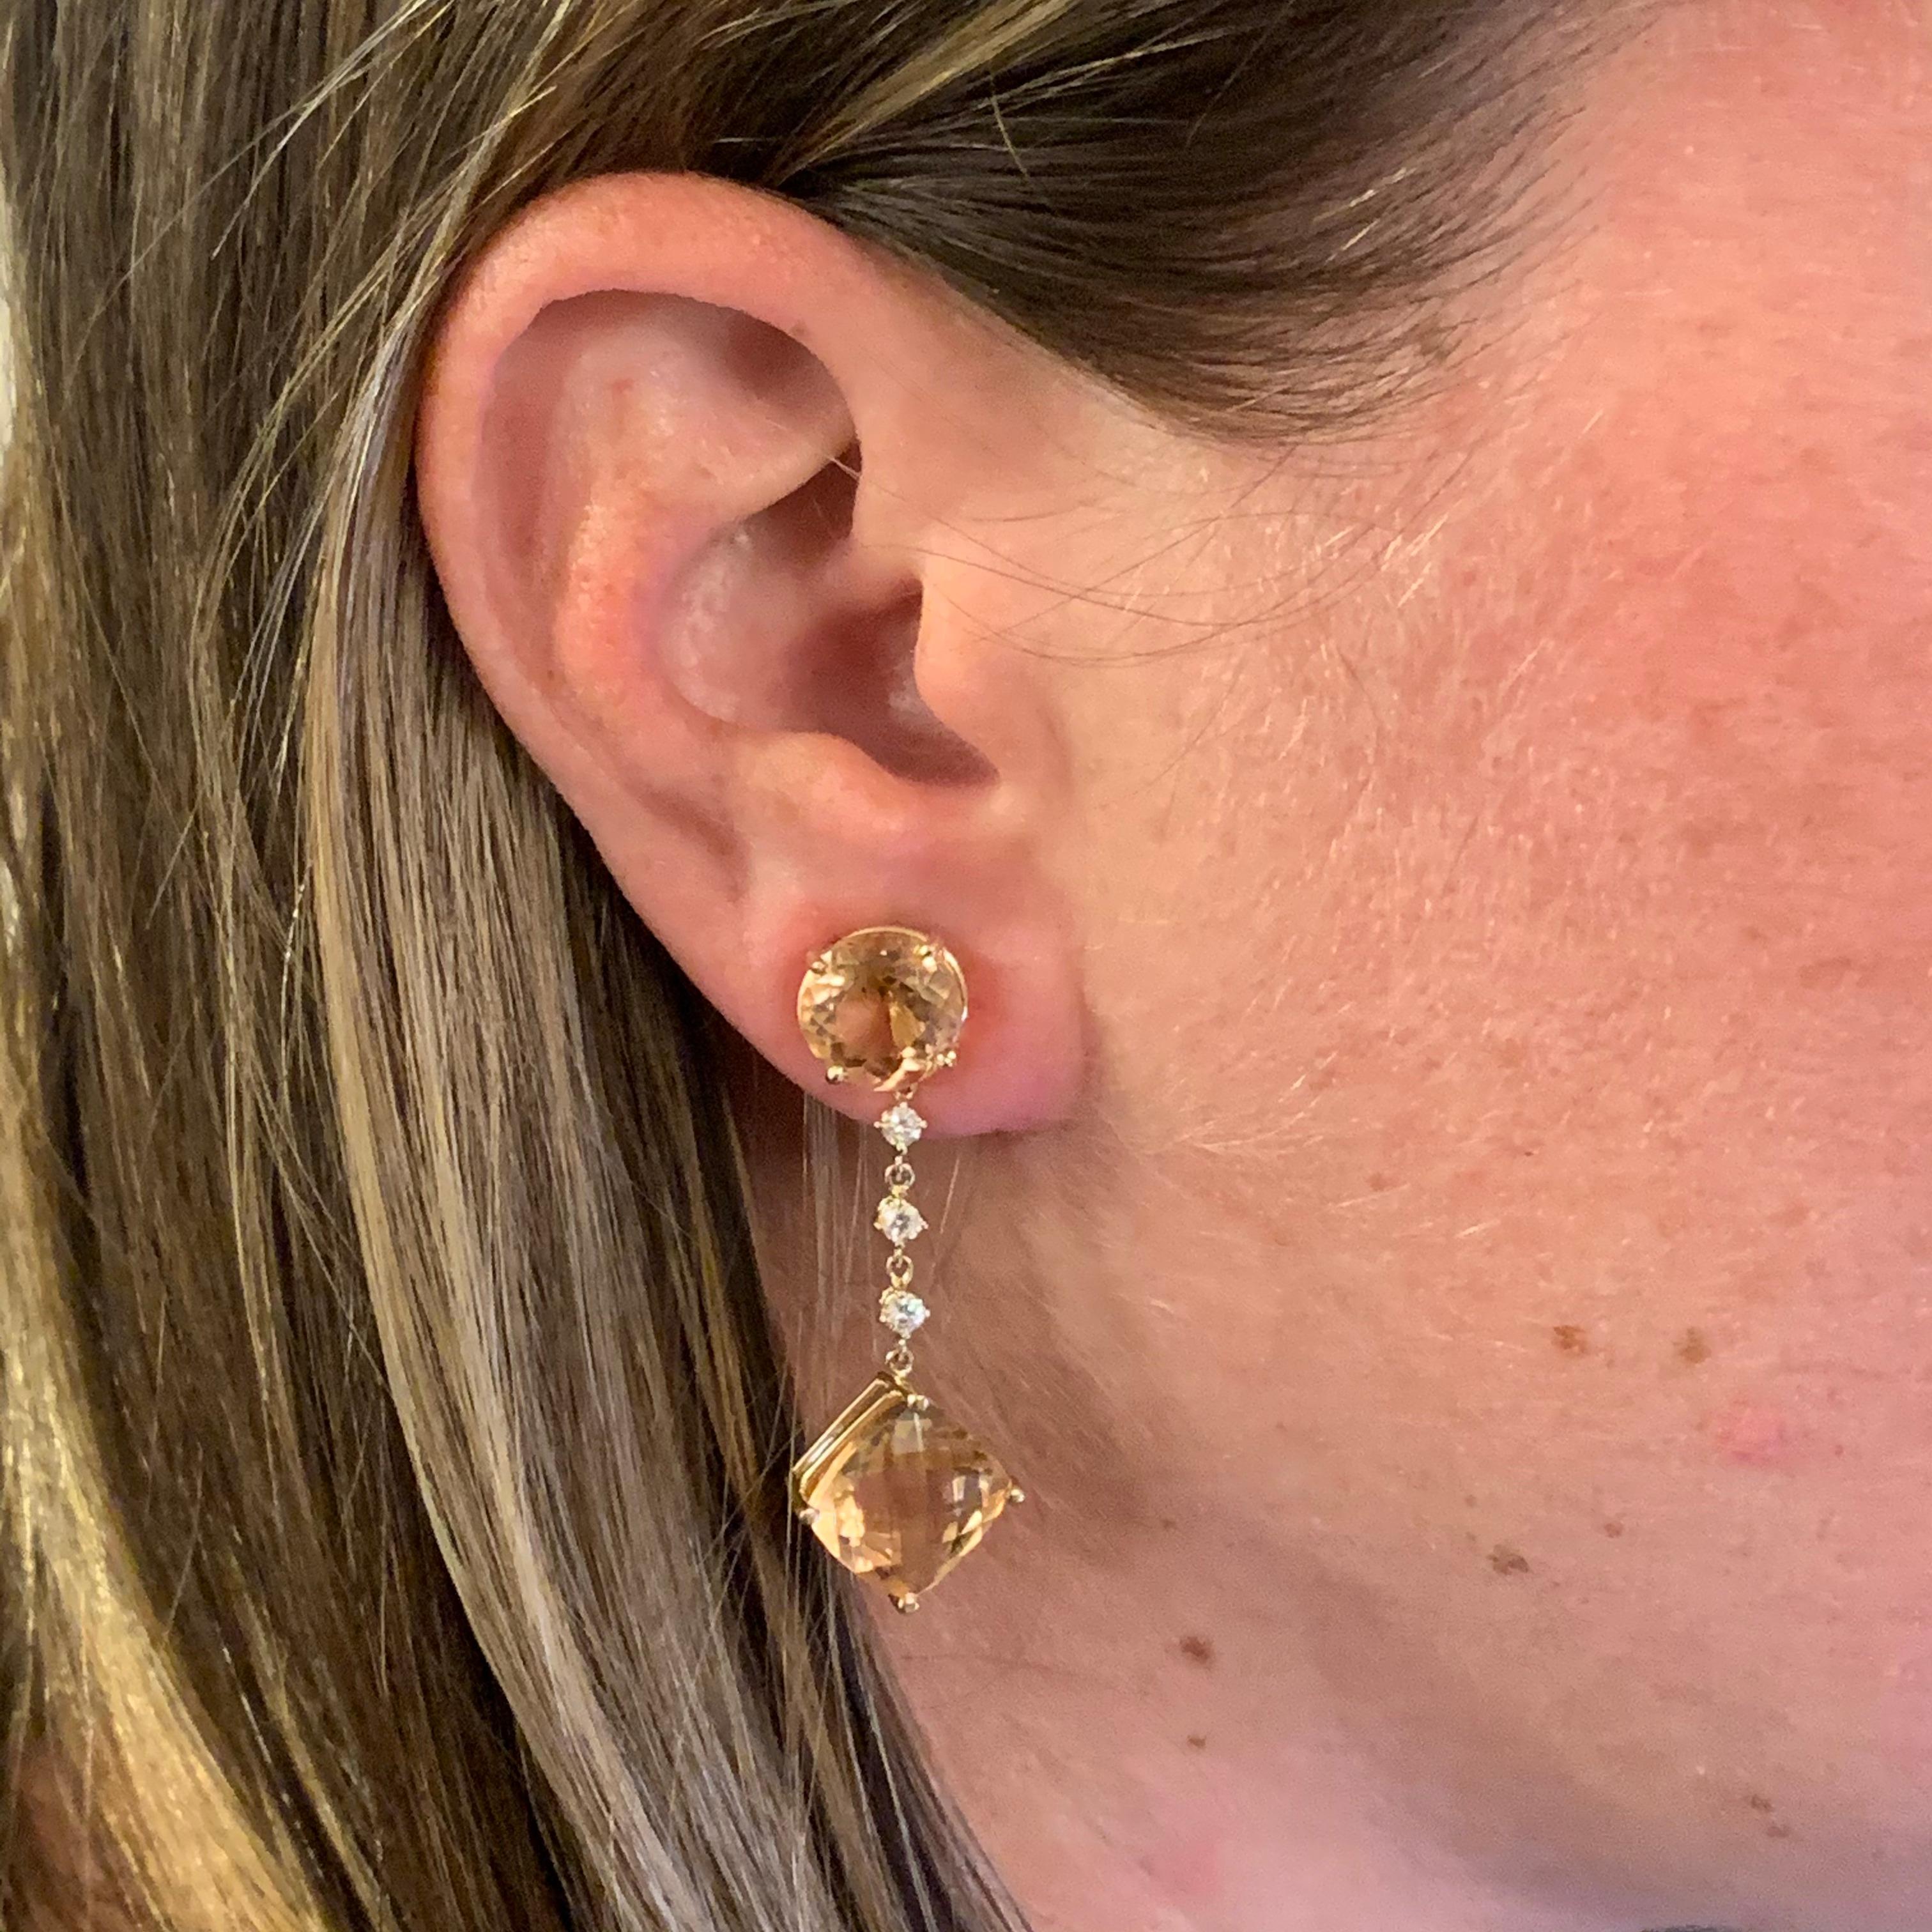 Natural Finely Faceted Quality Morganite Diamond Earrings 14k Gold 10.1 TCW Certified $5,950 111536

This is a Unique Custom Made Glamorous Piece of Jewelry!

Nothing says, “I Love you” more than Diamonds and Pearls!

This pair of Morganite earrings